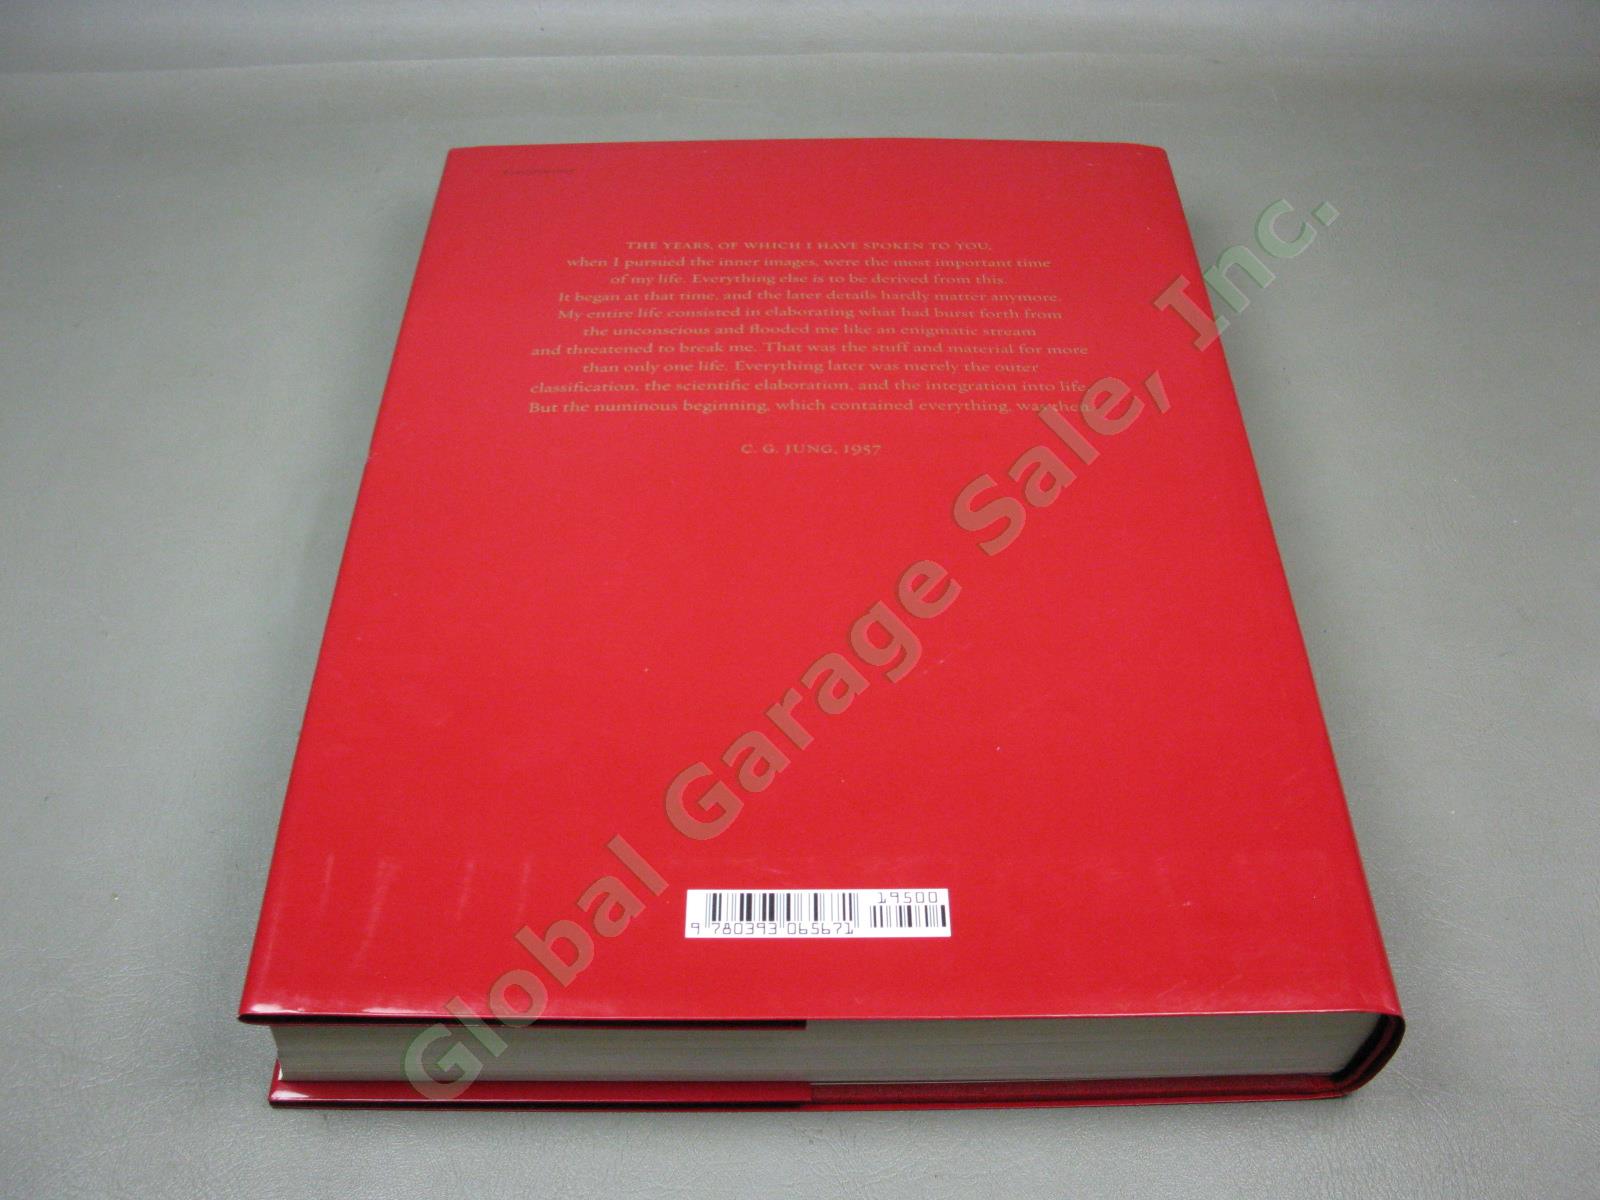 C.G Carl Jung The Red Book Liber Novus 2009 First Edition Hardcover +Dust Jacket 1